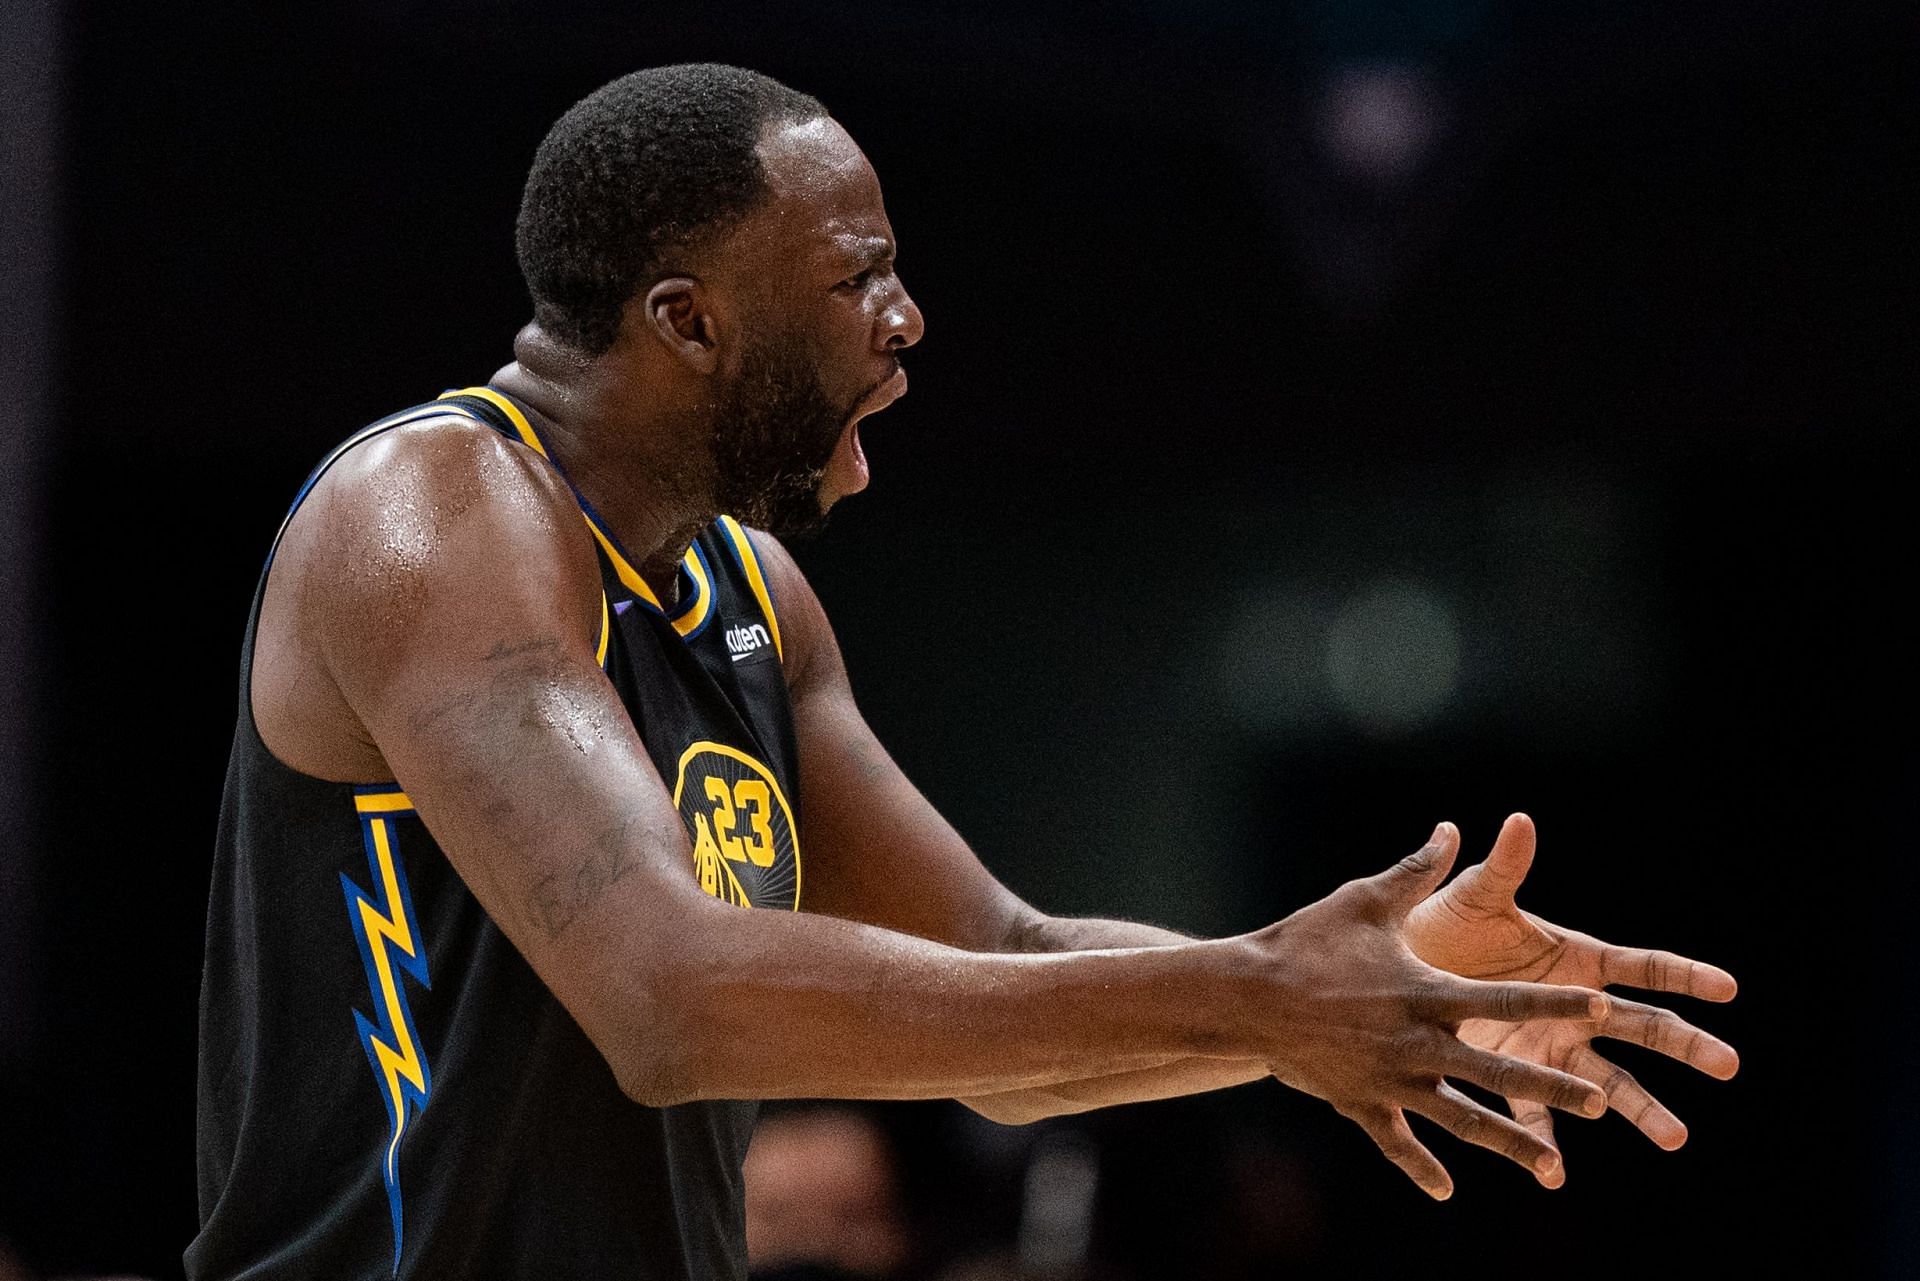 Stephen Curry heaped praise on Golden State Warriors teammate Draymond Green for his defense